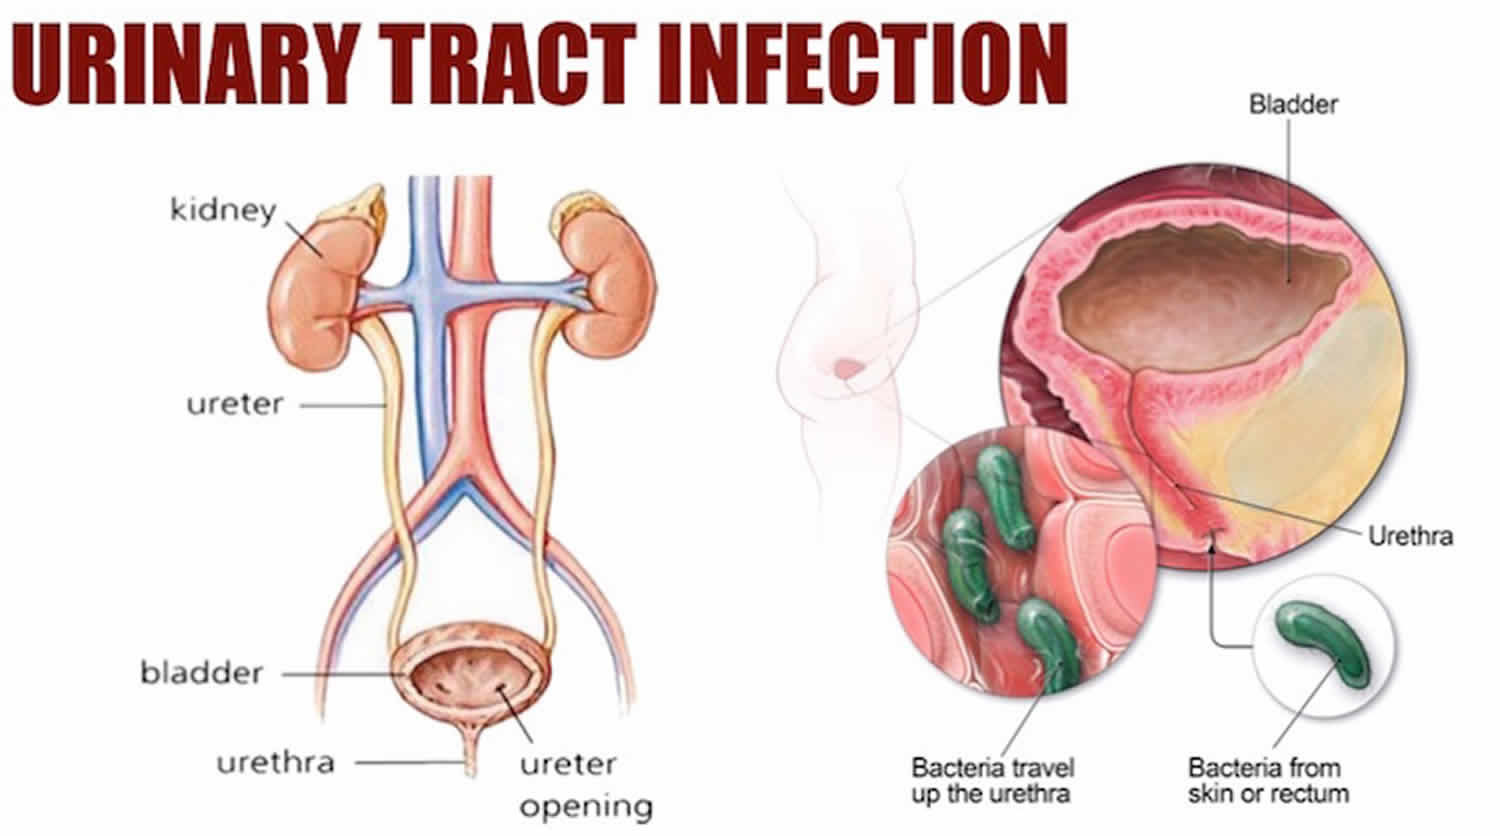 Urinary tract infection causes, symptoms, diagnosis